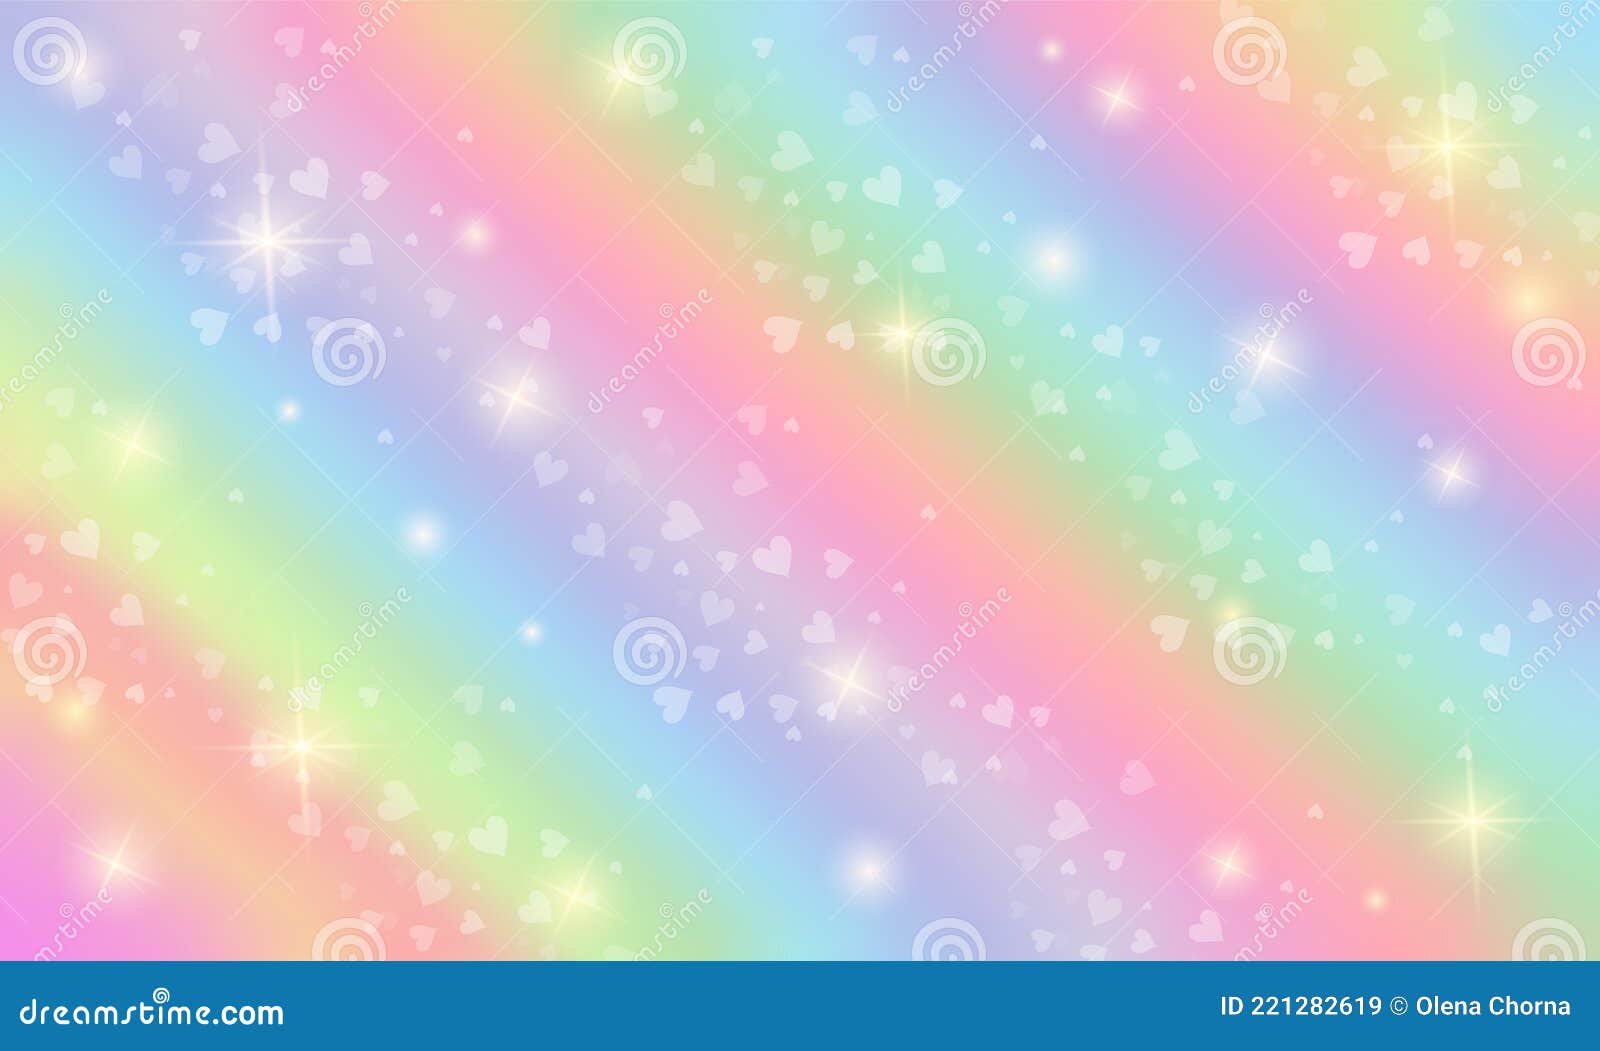 Rainbow Fantasy Background. Holographic Illustration in Pastel Colors. Cute  Cartoon Girly Background Stock Vector - Illustration of baby, pink:  221282619